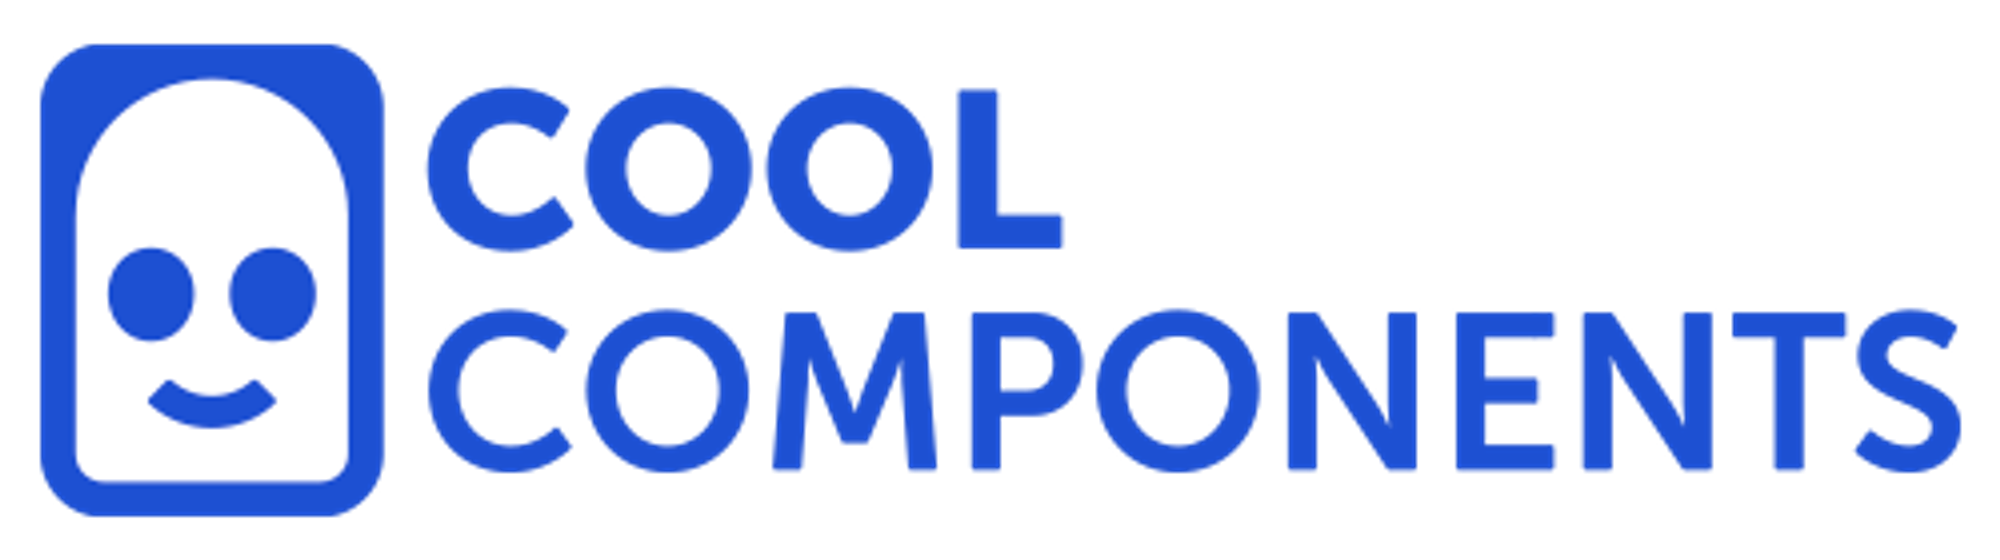 Cool Components is an online retailer of cutting-edge electronic components. Visit coolcomponents.co.uk for more information.